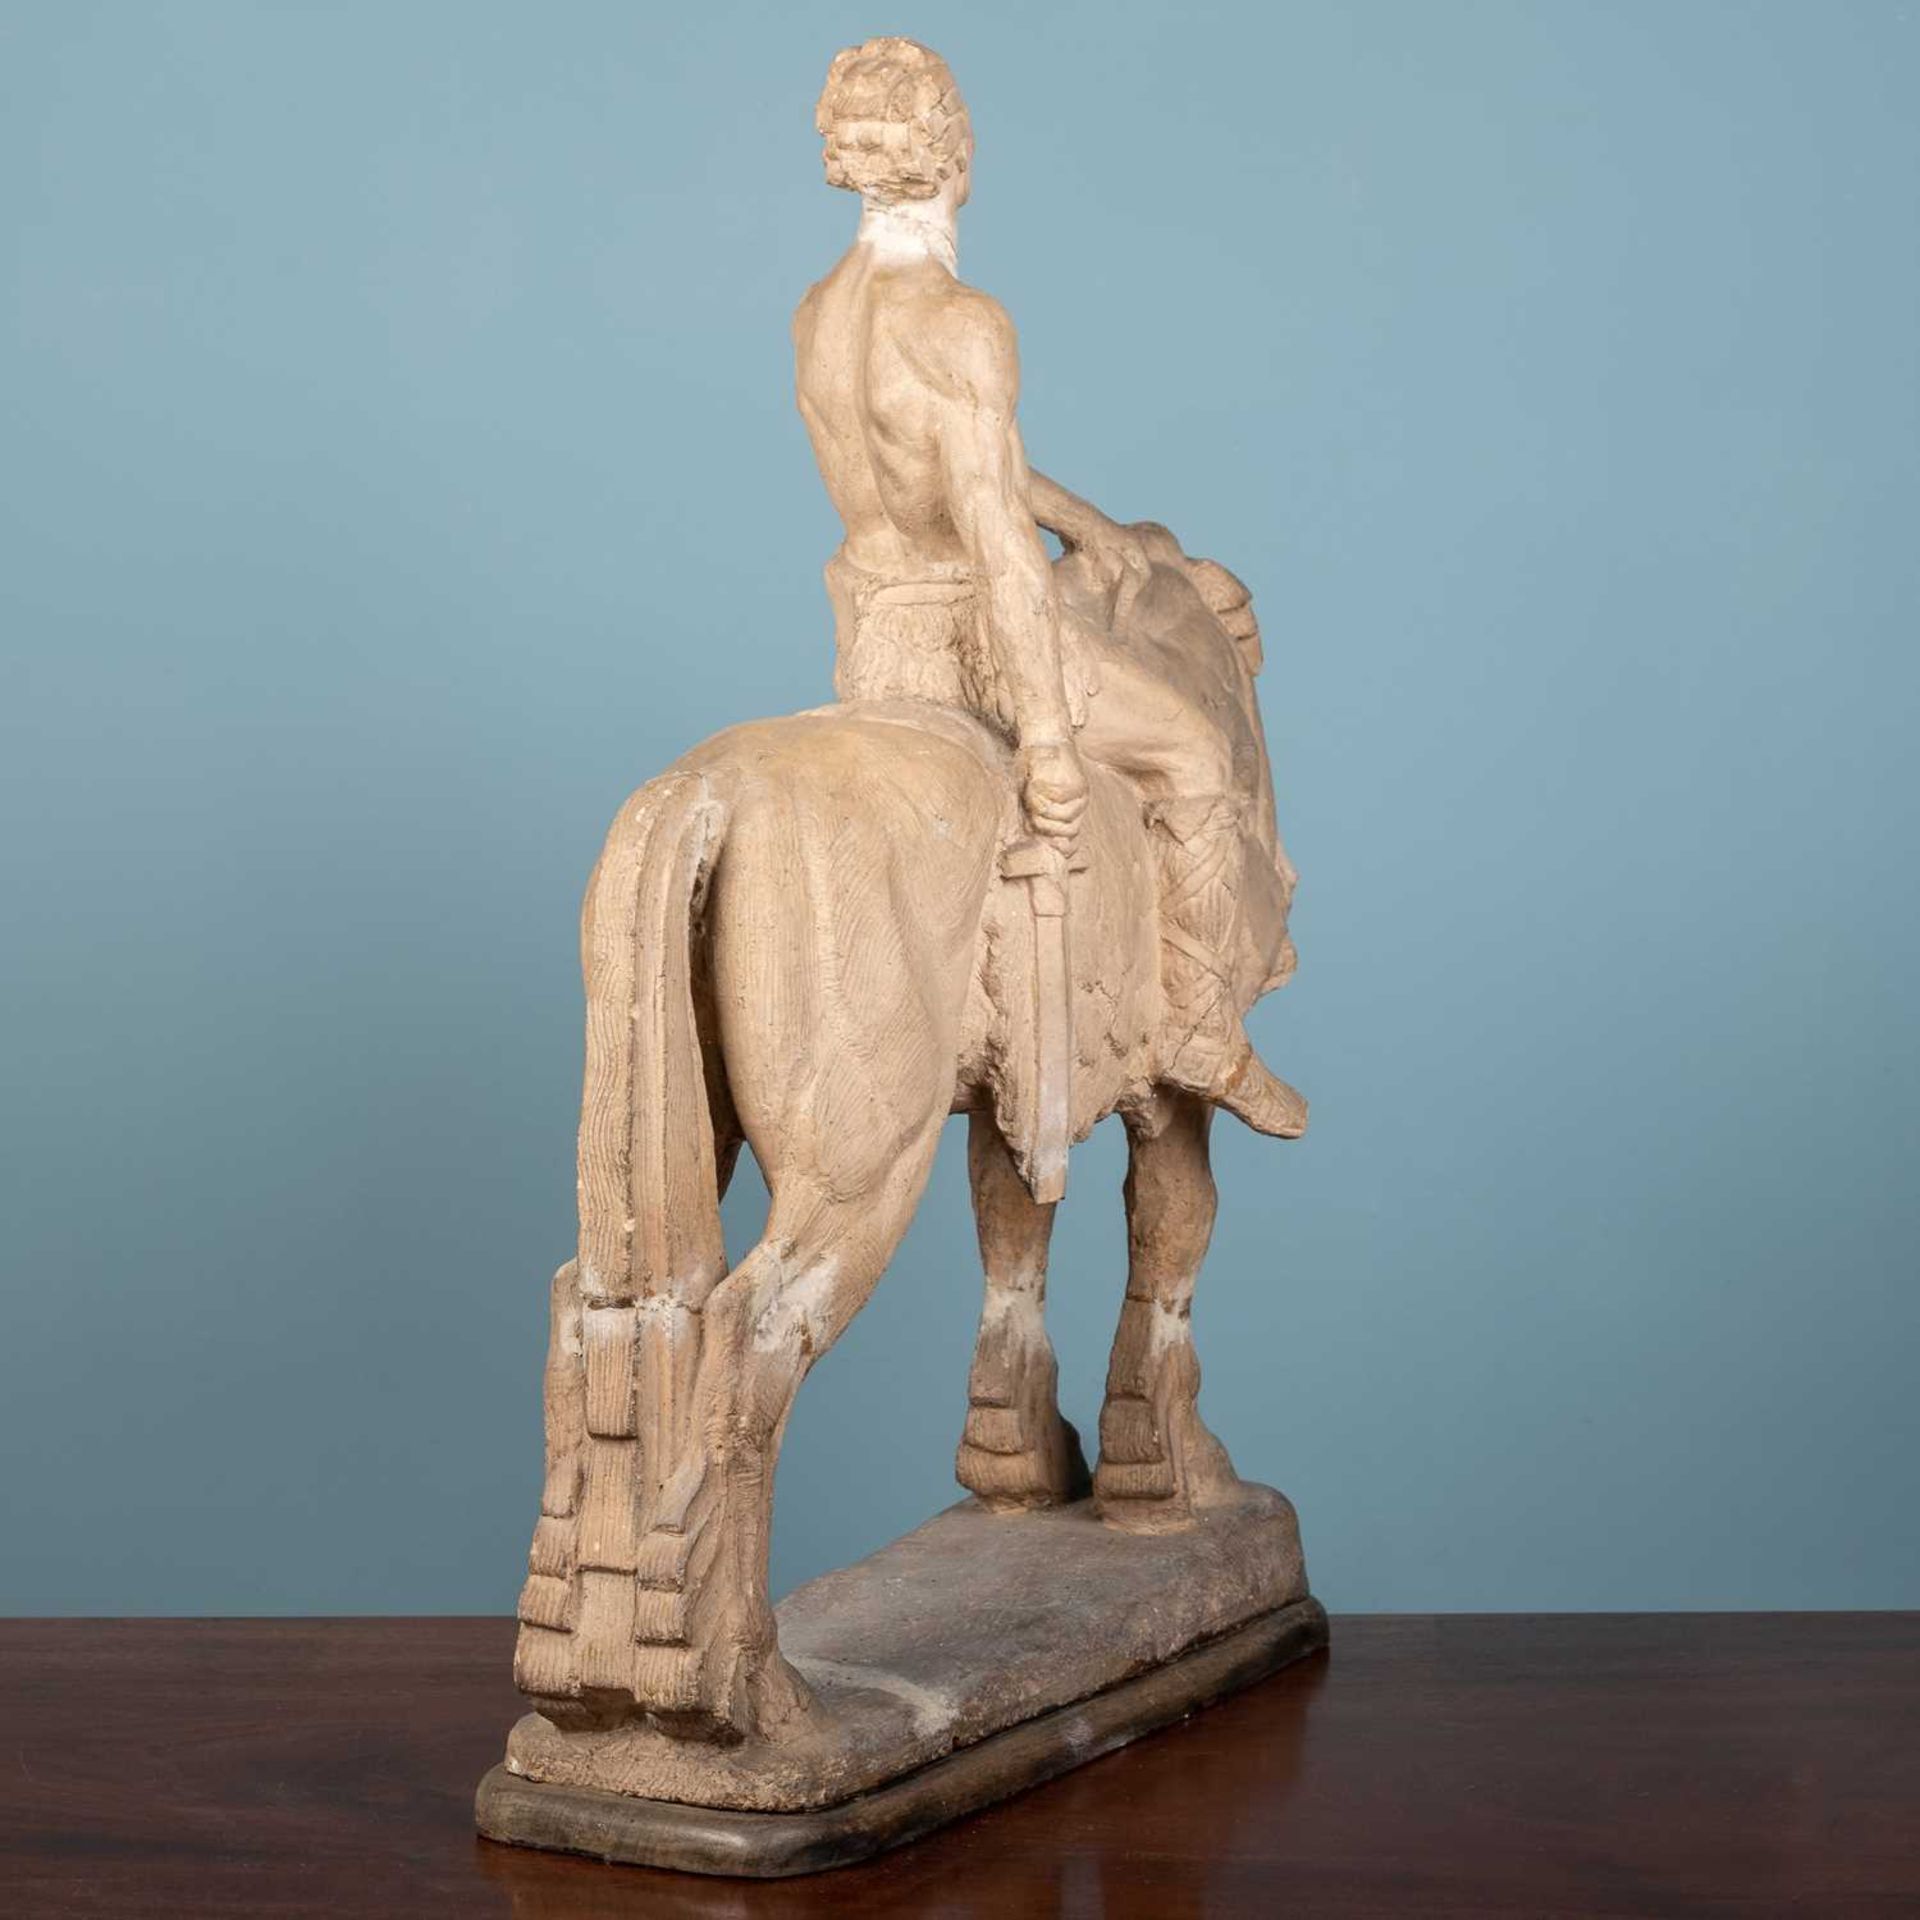 Early 20th century German school terracotta figure of a warrior on a horse - Image 2 of 15